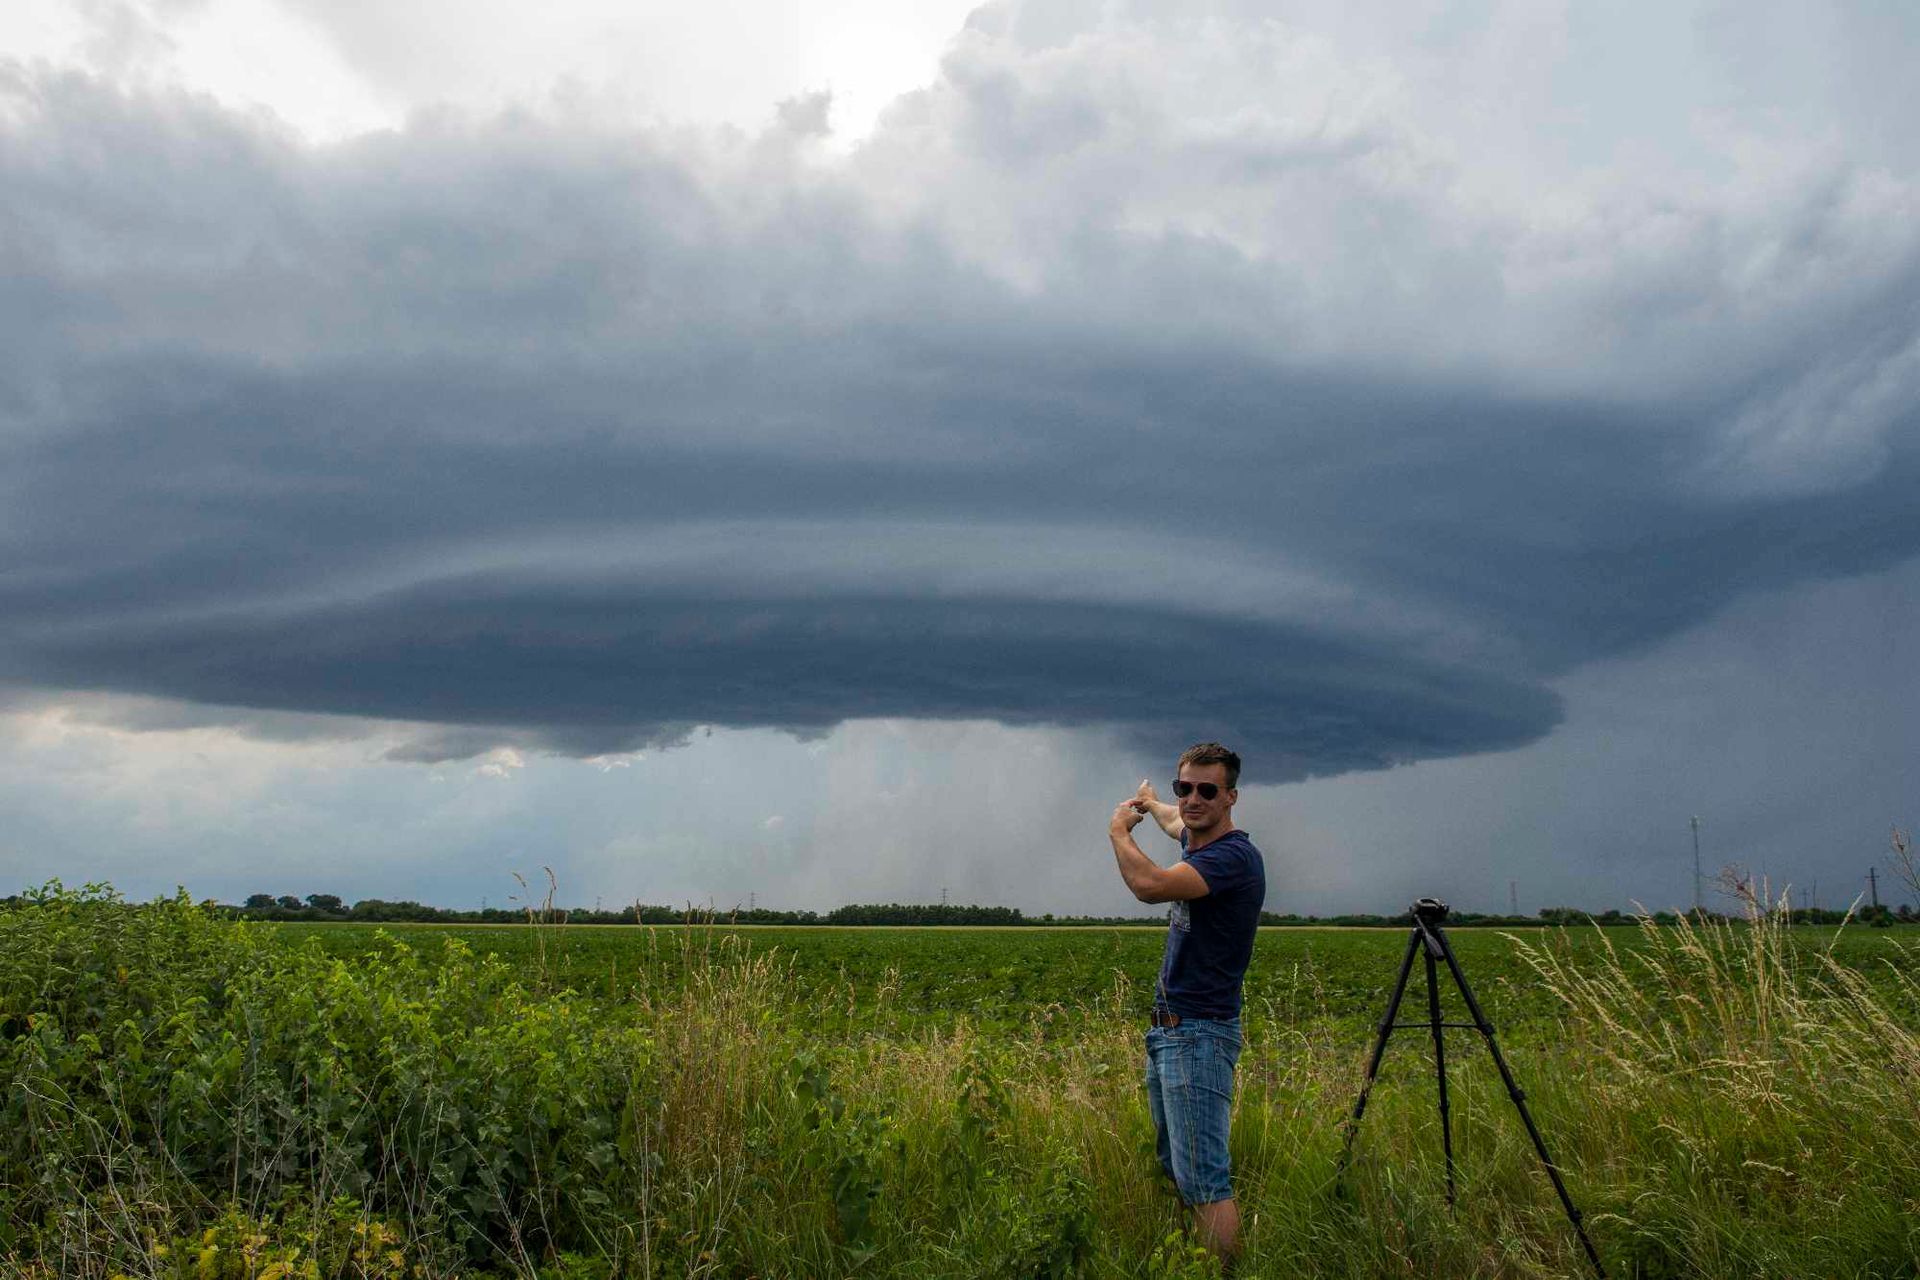 A man is standing in a field taking a picture of a tornado.